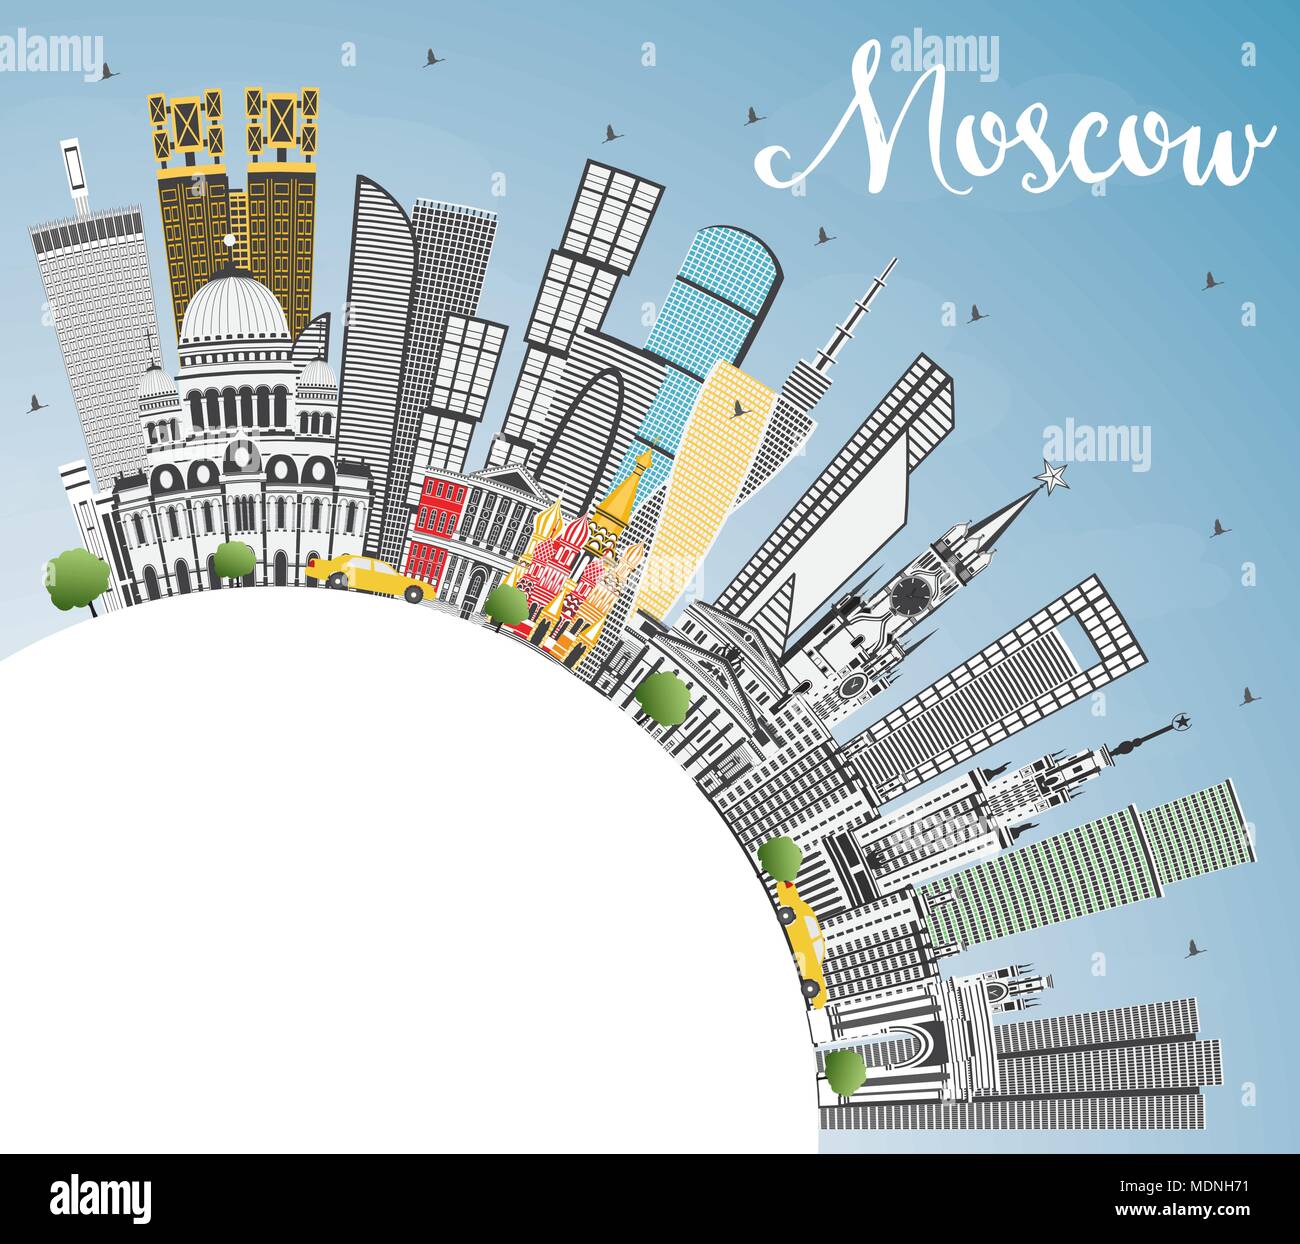 Moscow Russia Skyline with Gray Buildings, Blue Sky and Copy Space. Vector Illustration. Stock Vector